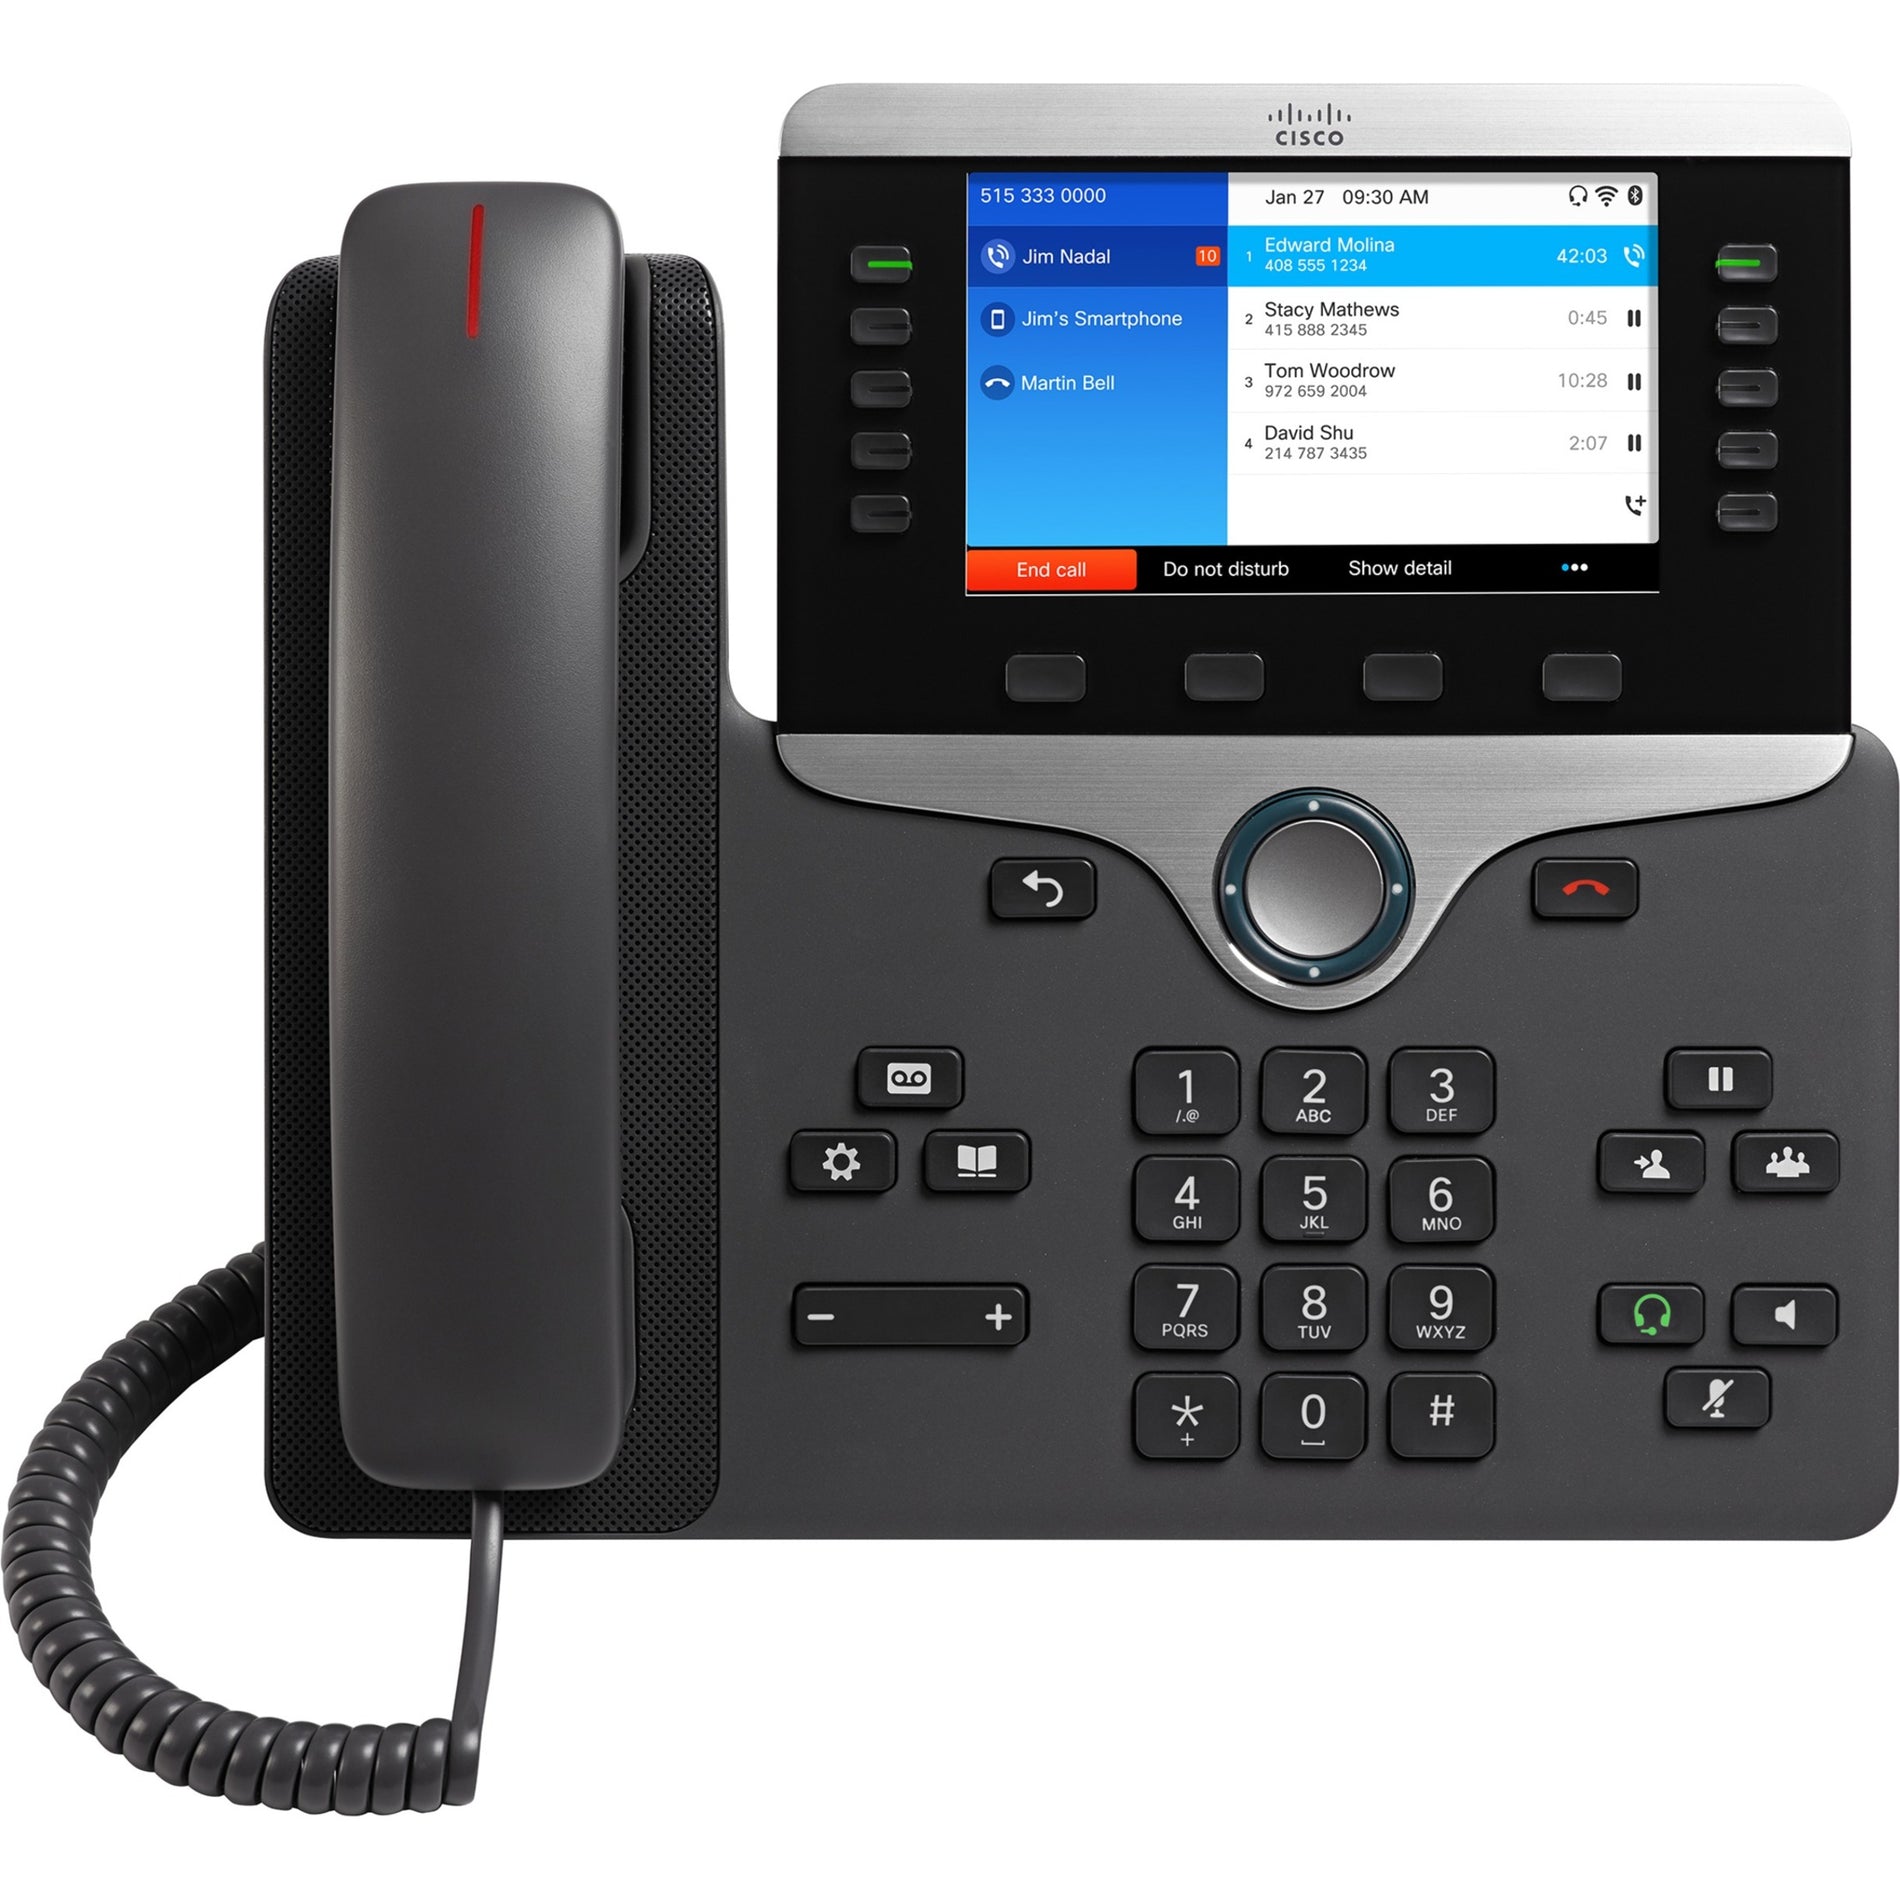 Cisco CP-8861-3PCC-K9= IP Phone 8861 for 3rd Party Call Control, Color Display, Wi-Fi, 5 Phone Lines